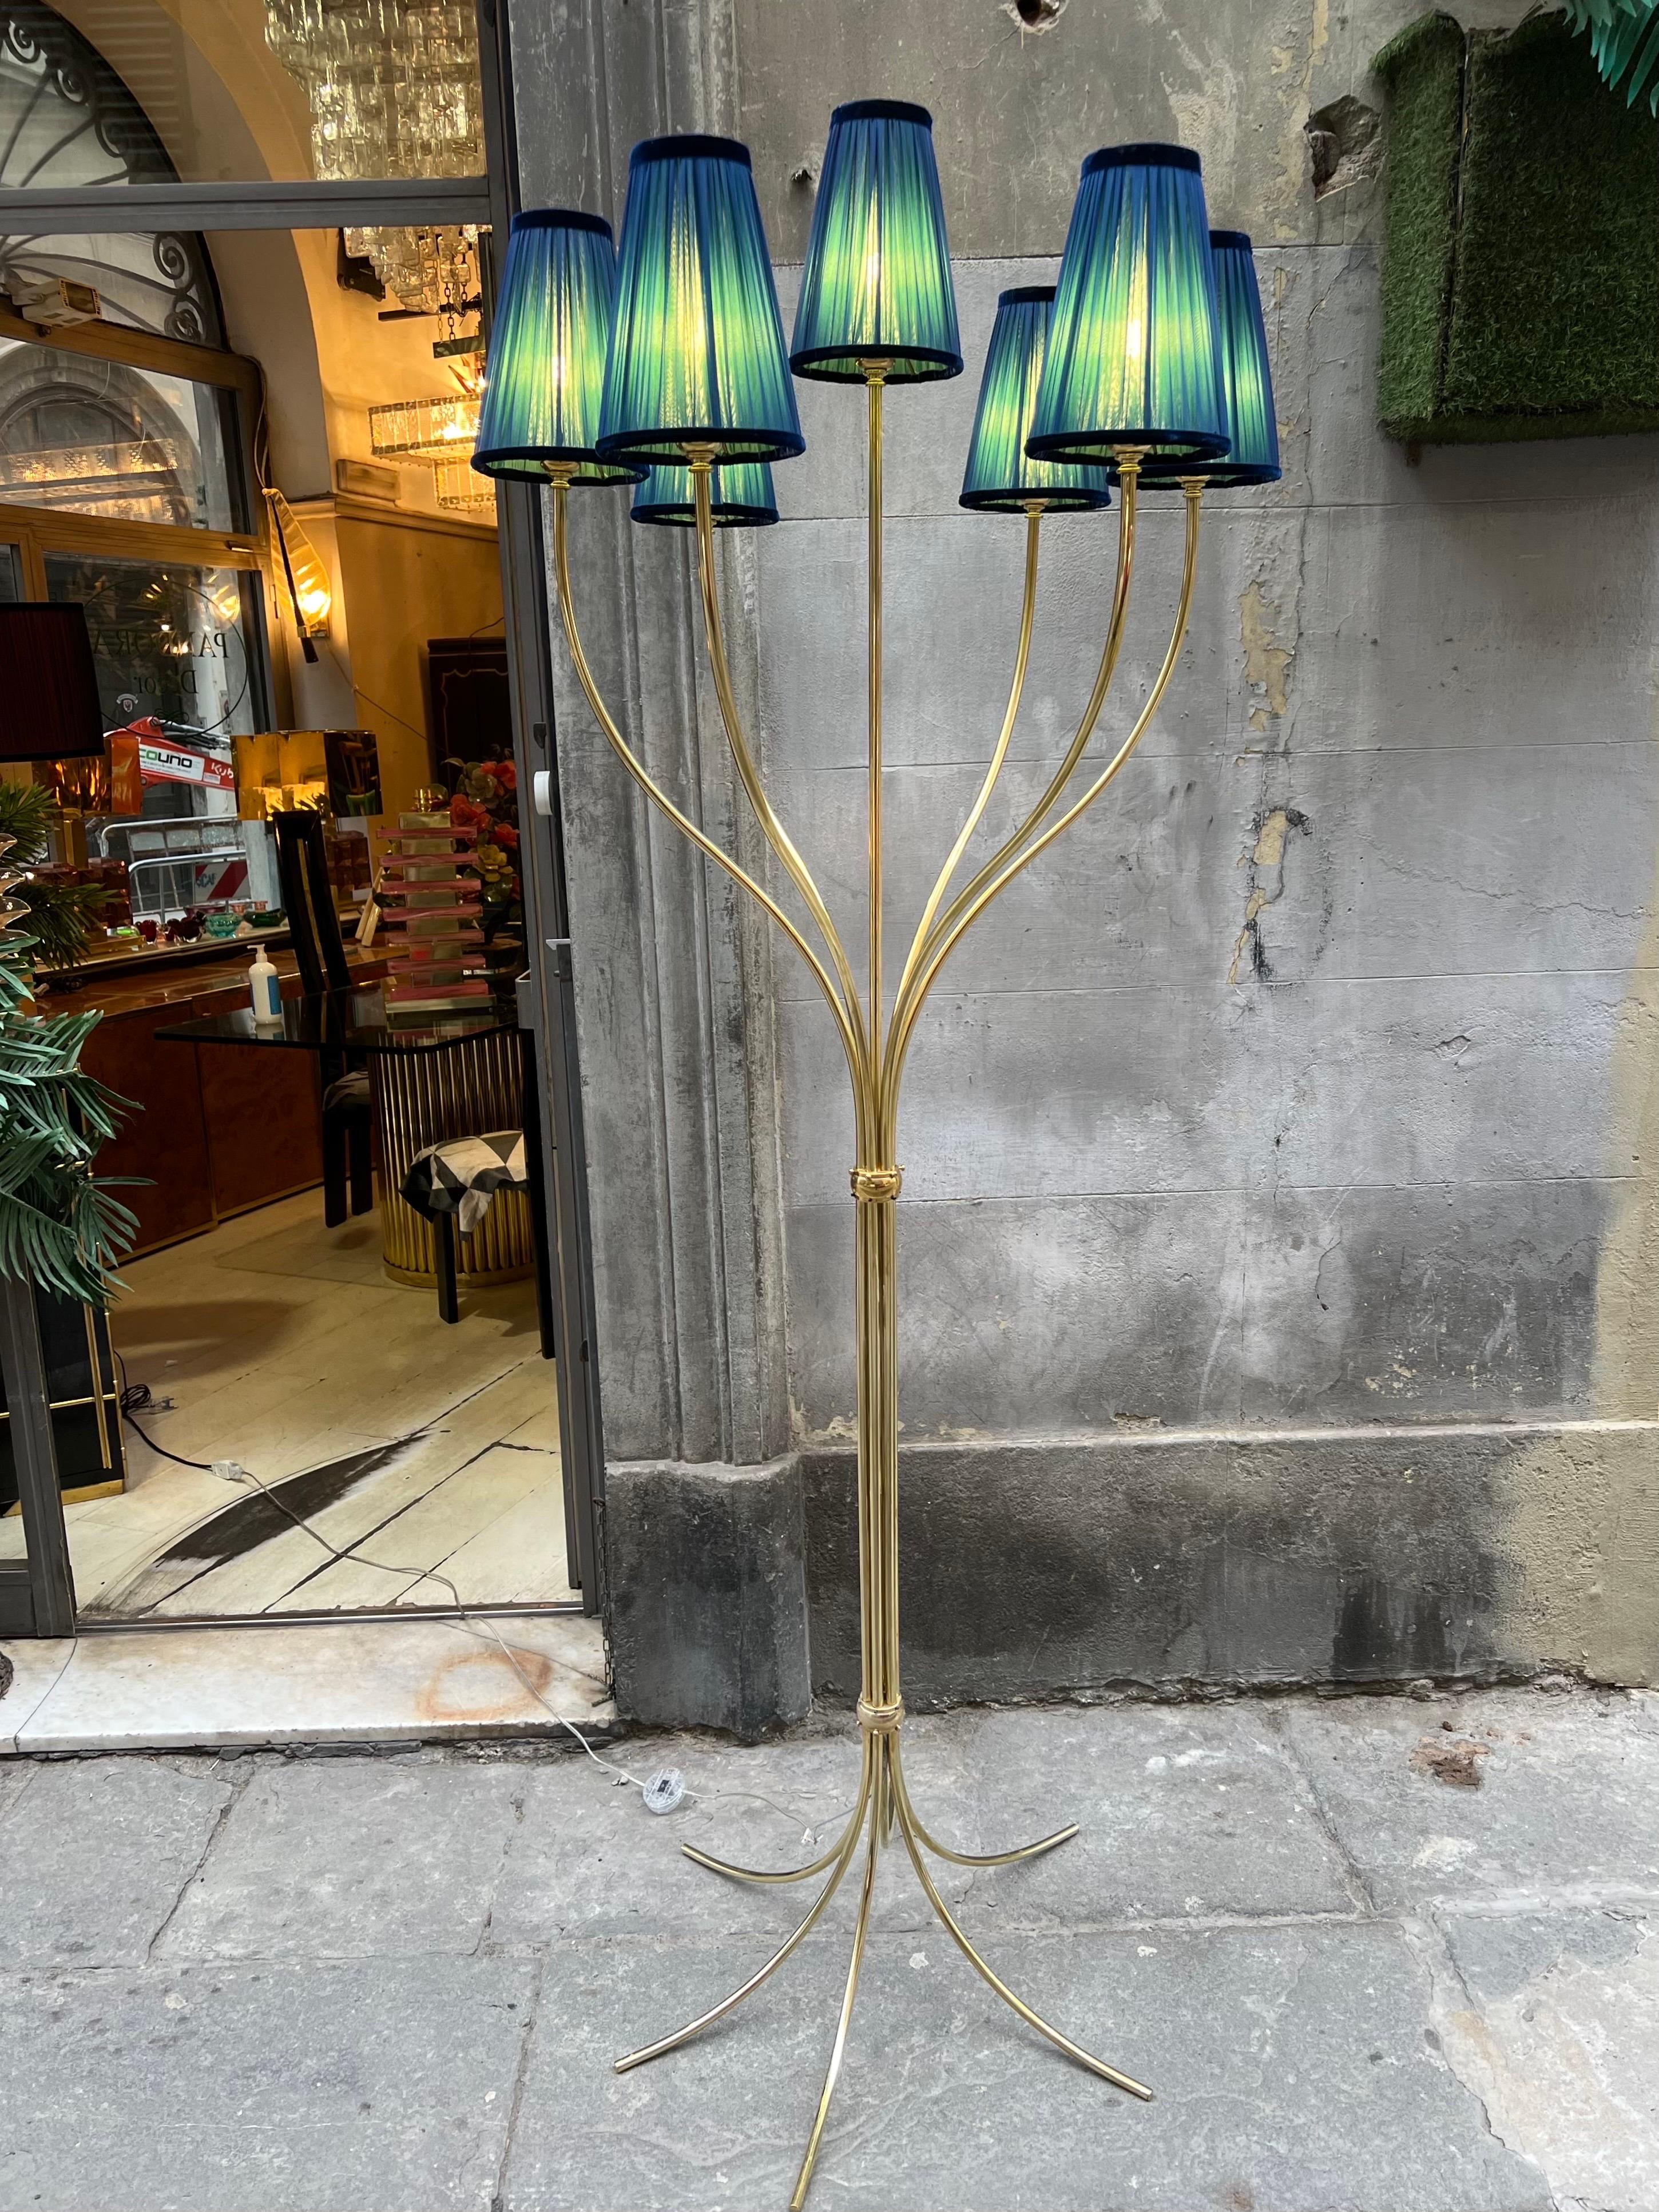 Vintage brass floor lamp with 7 brass arms each ends with its lampshade. Our Lampshades are handcrafted in double pleated silk chiffon, gold inside and green outside. When the light is on the colors mix creating an amazing effect.
The floor lamp has